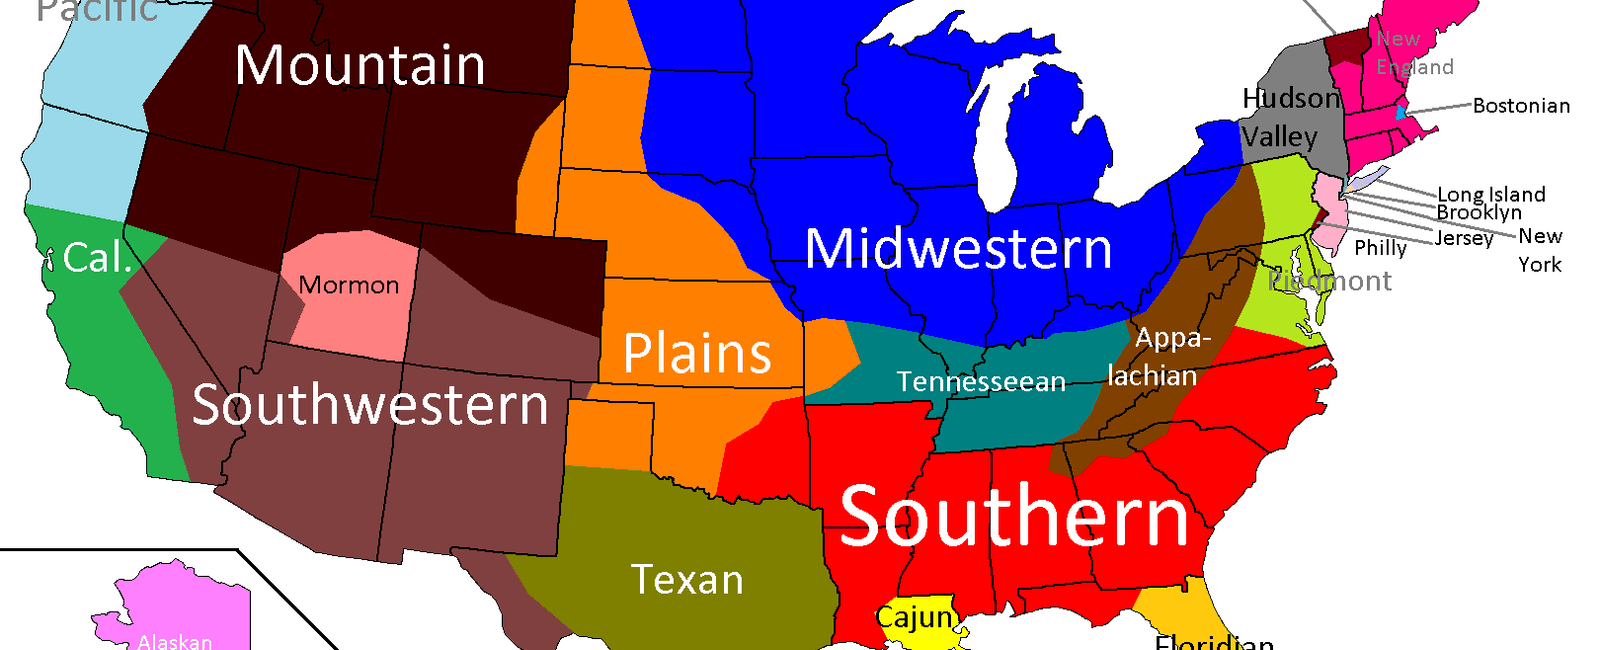 The so called southern accent in the united states today only began to form after the civil war